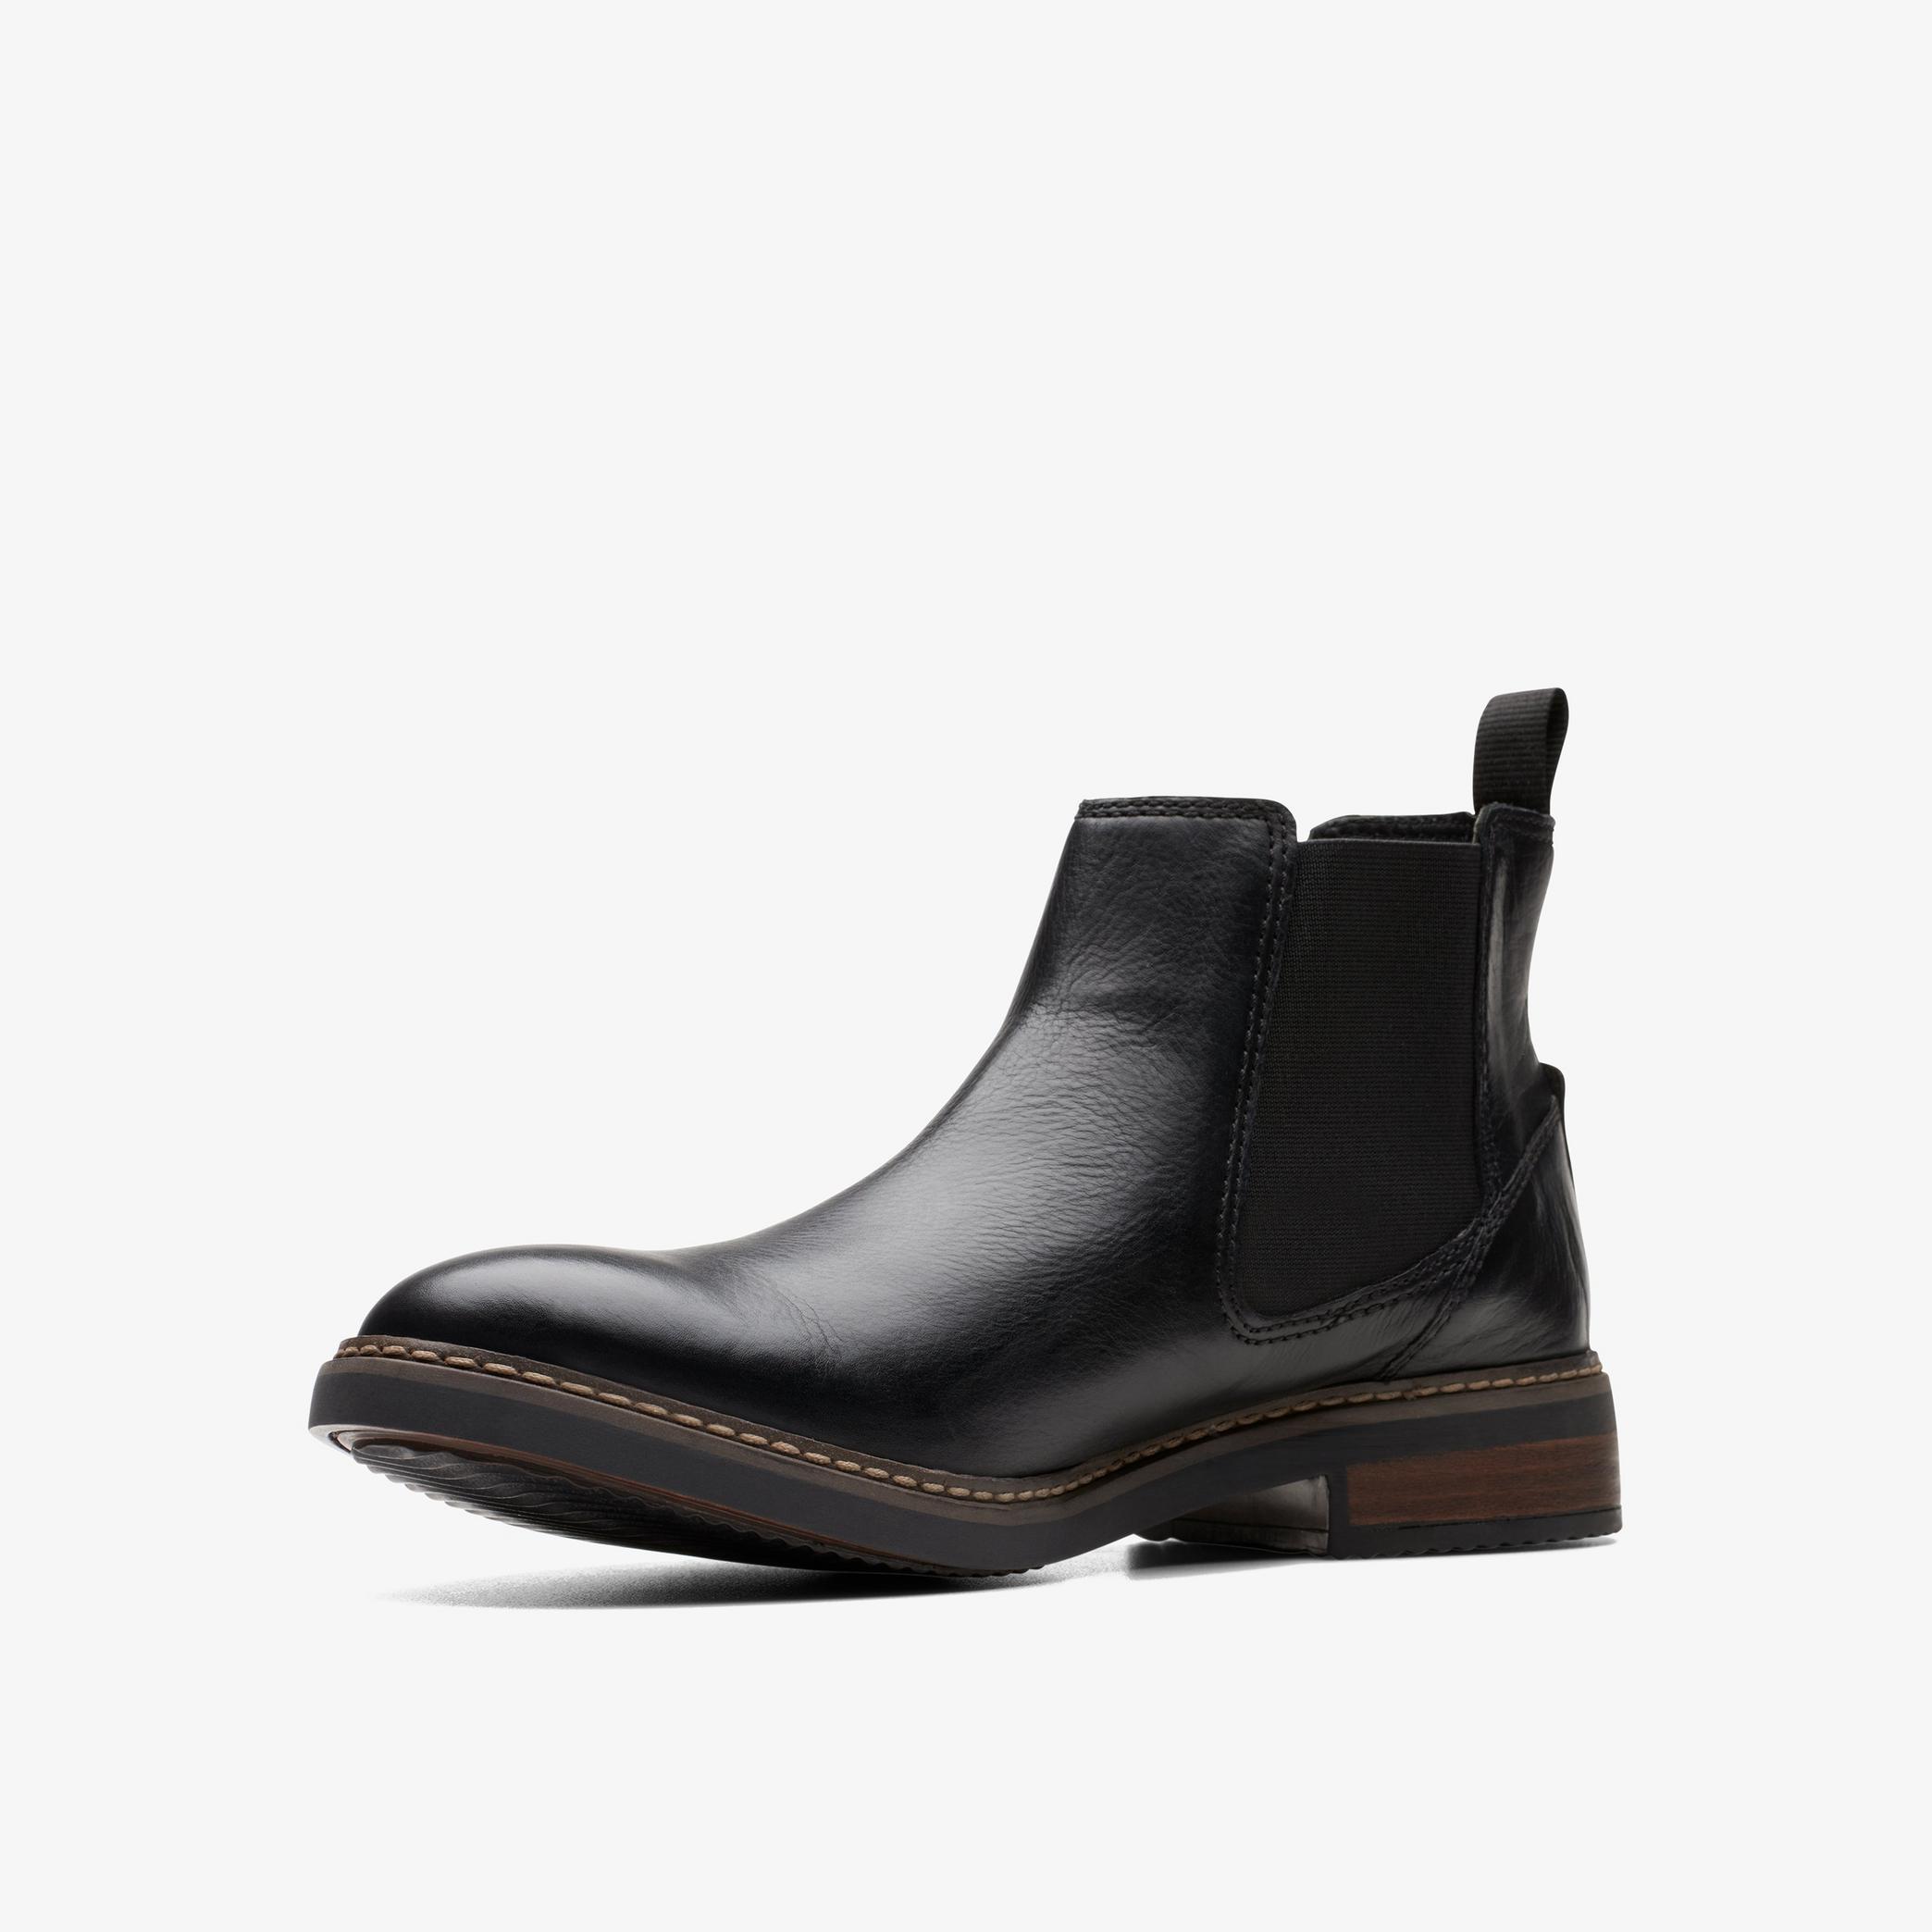 Blackford Top Black Leather Chelsea Boots, view 4 of 6